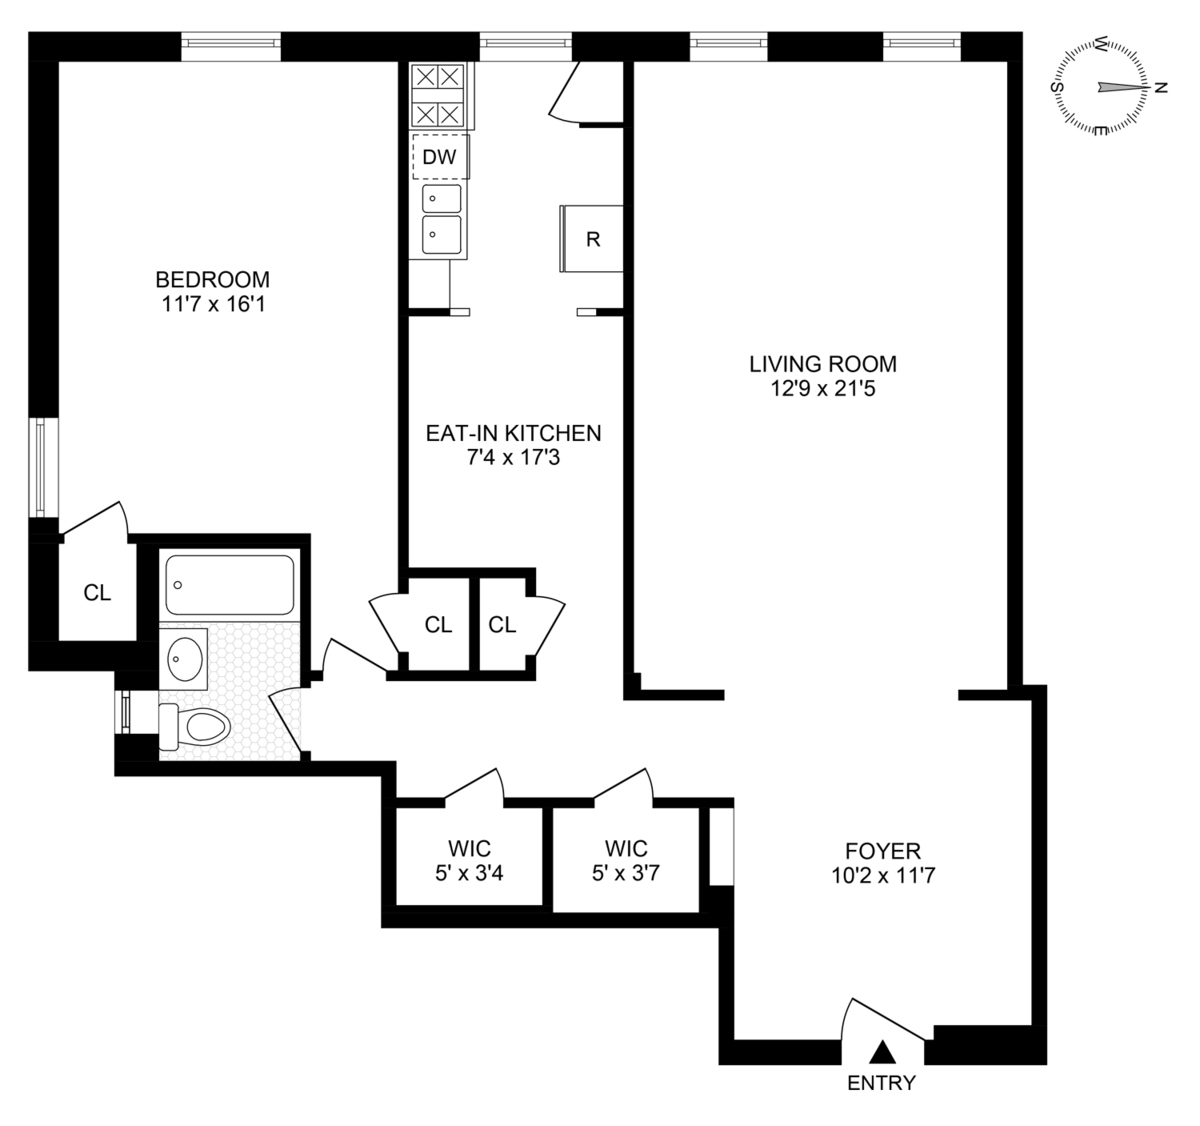 floorplan showing living room on one end of the unit and the bedroom on the other